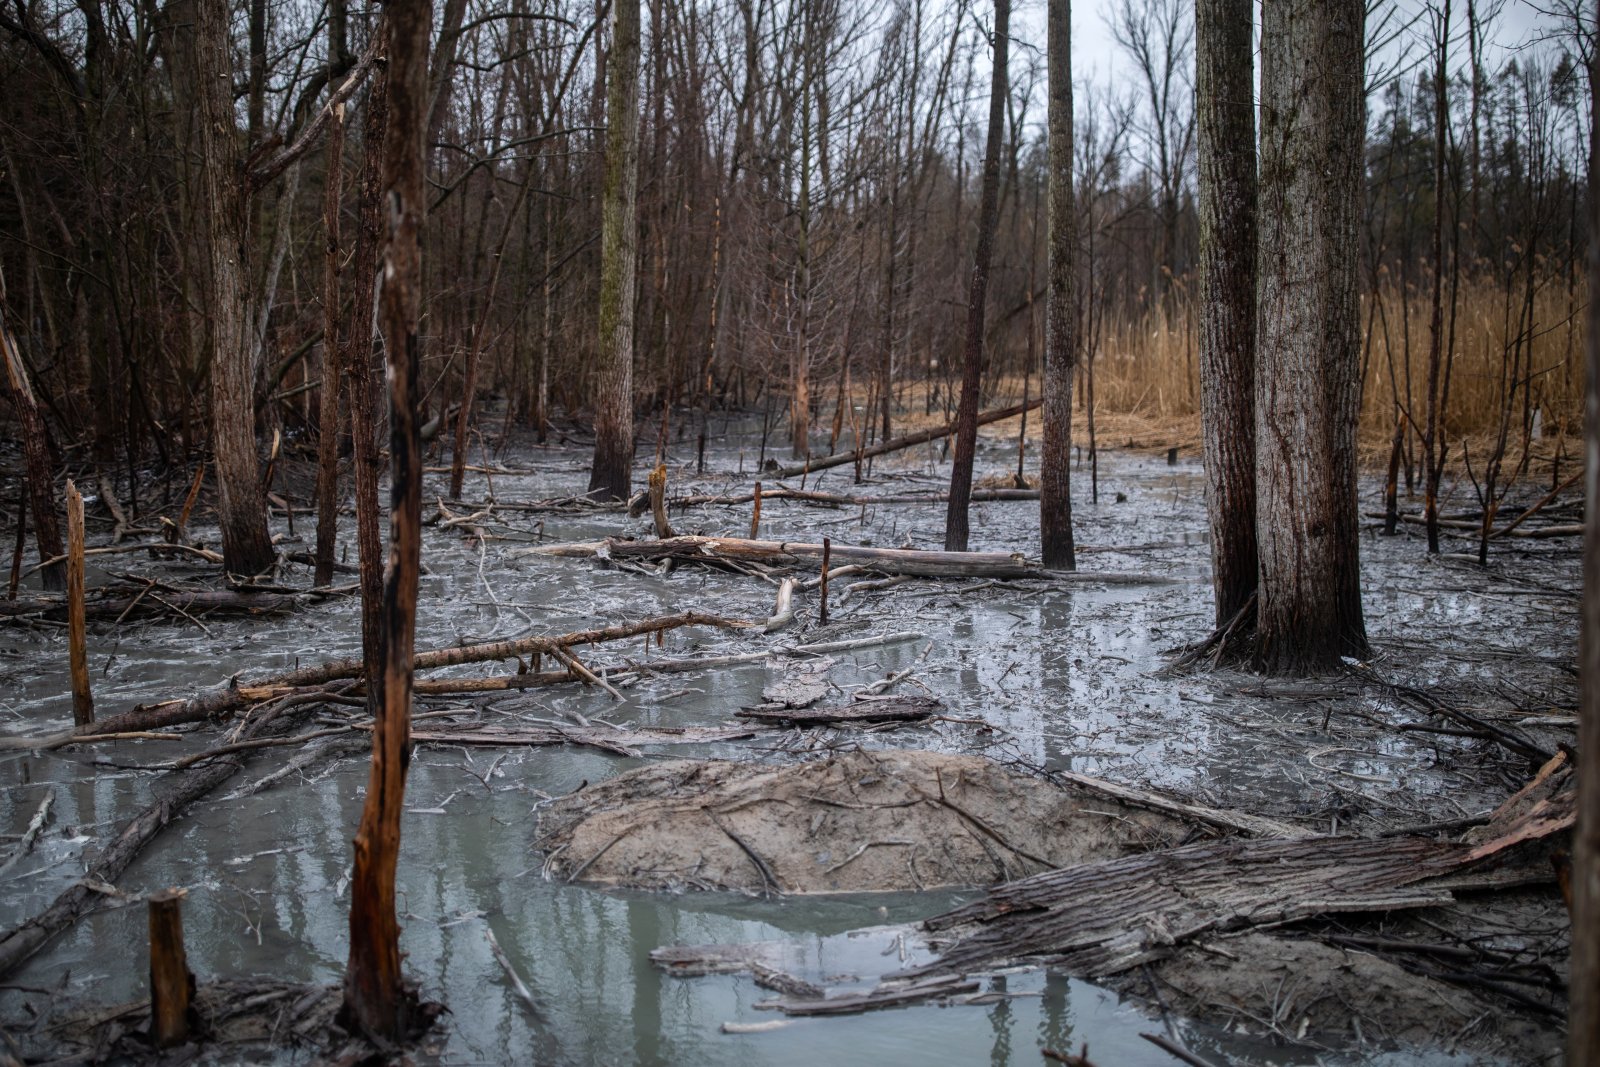 An old well in Norfolk County has been spewing water and pollutants for several years, creating what one resident called "our own Chernobyl." File photo by Nick Iwanyshyn.